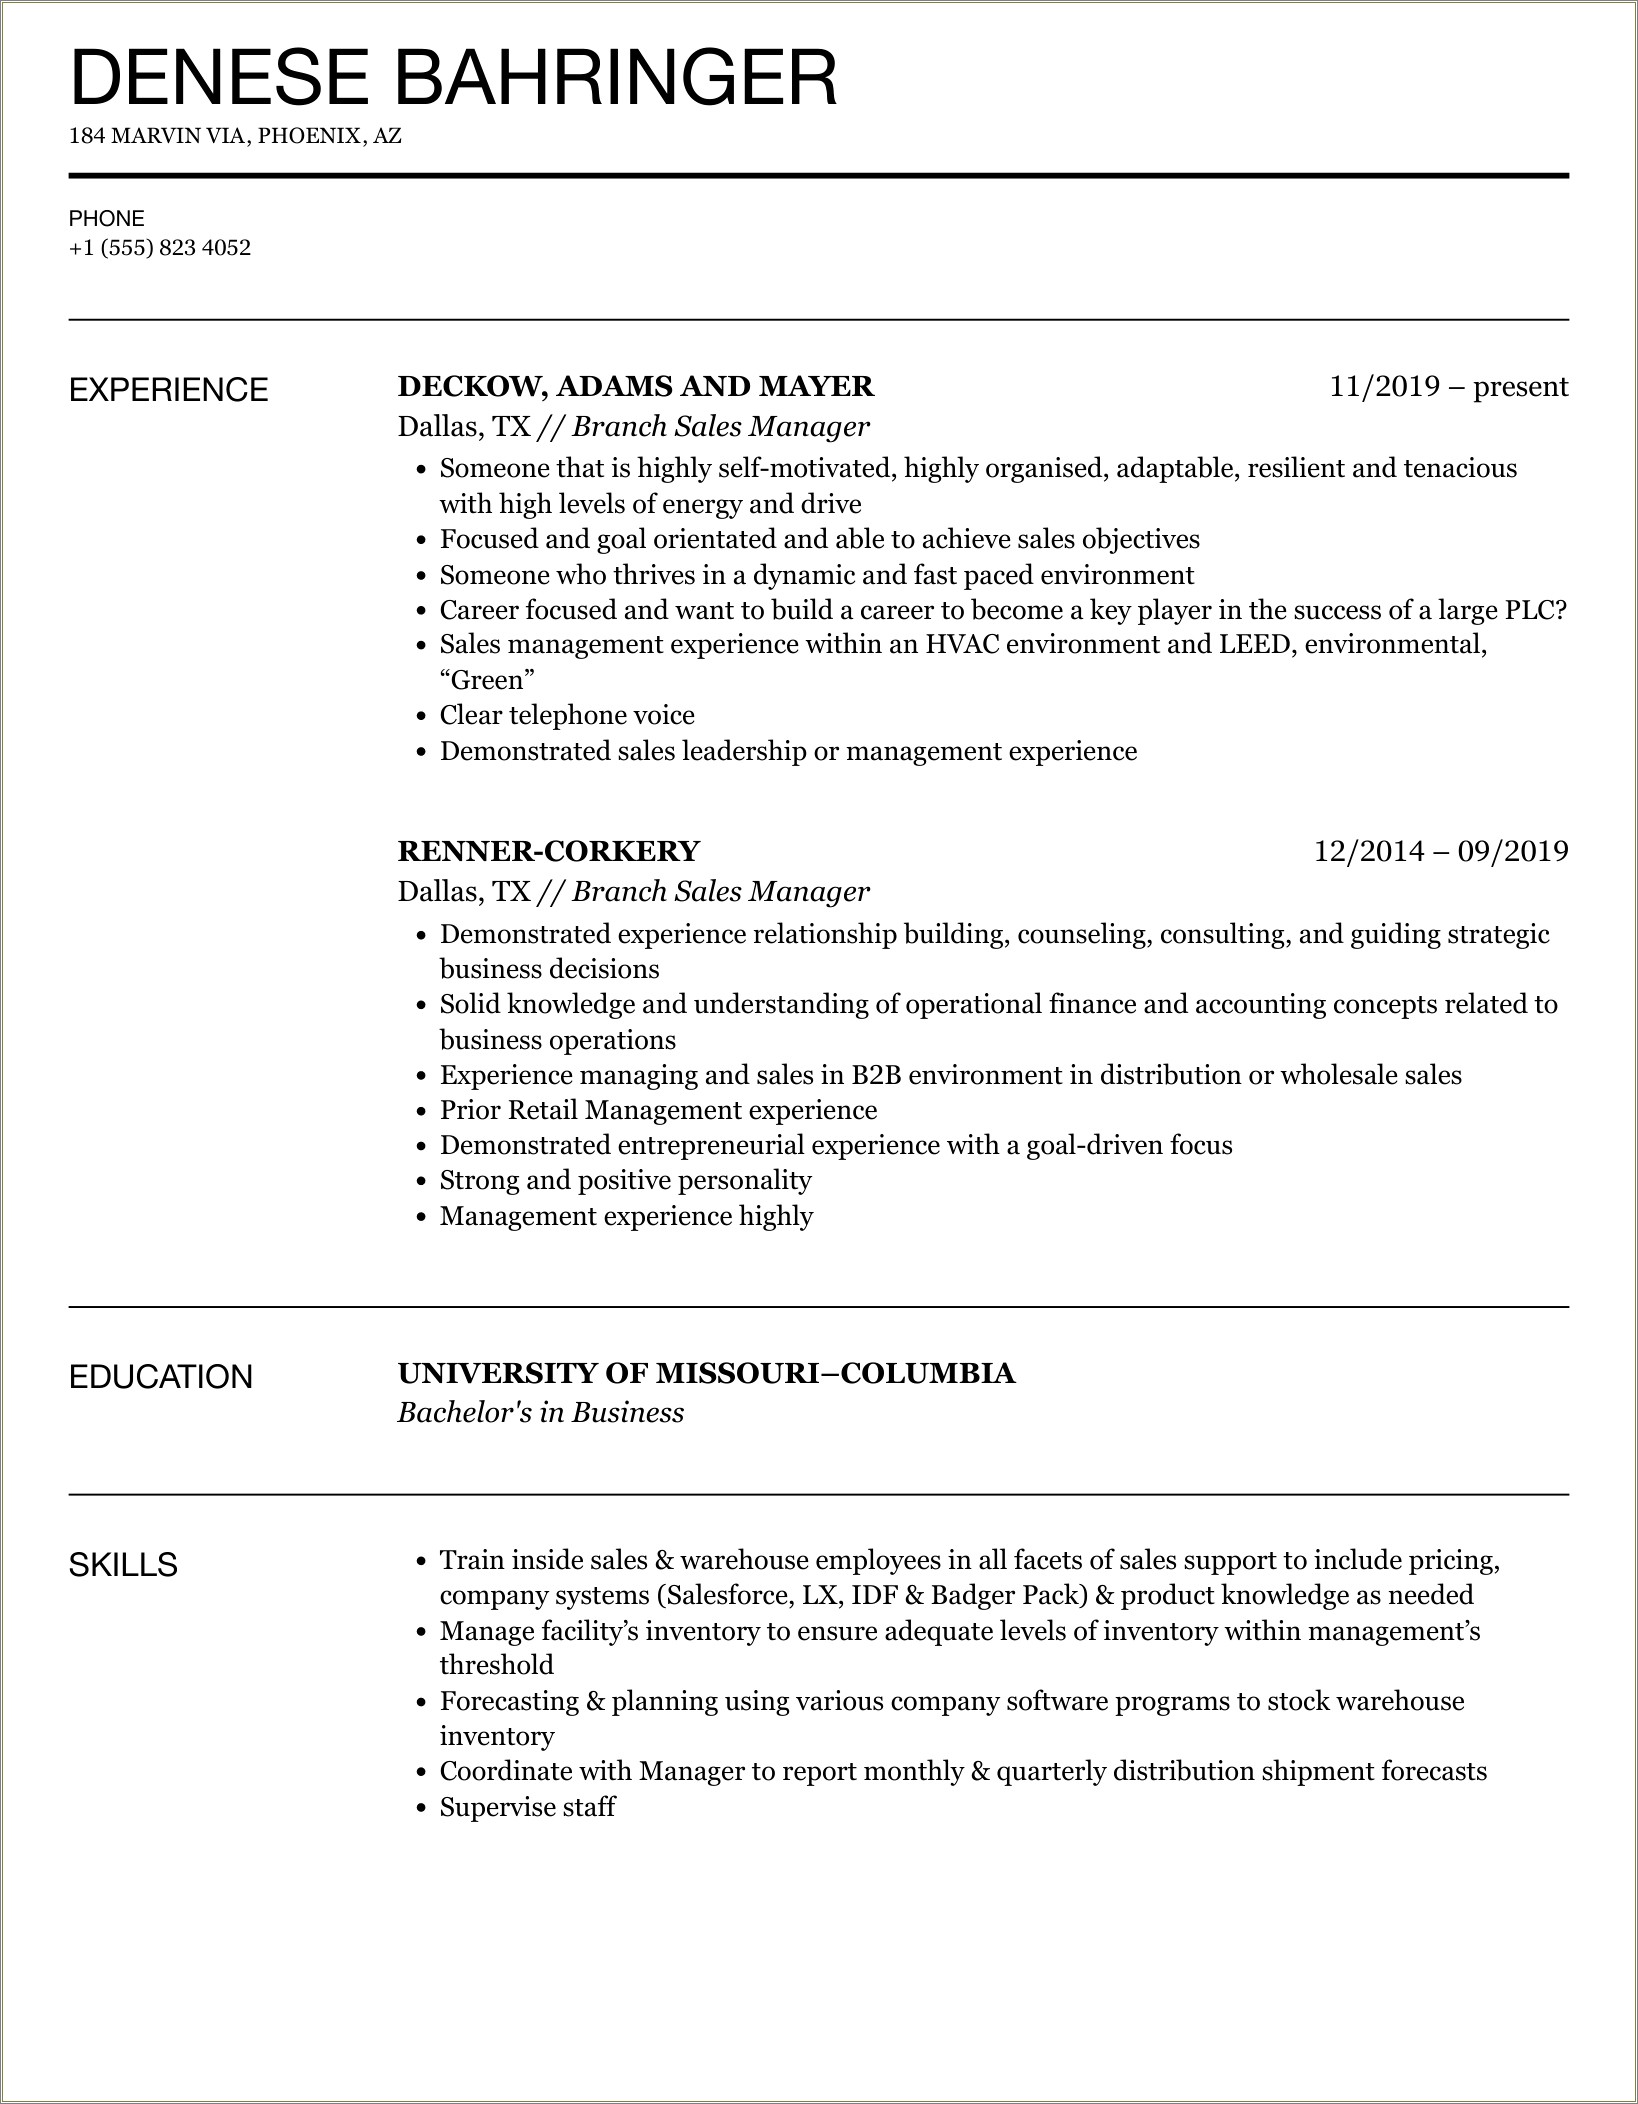 Samples Of Bank Branch Manager Resume